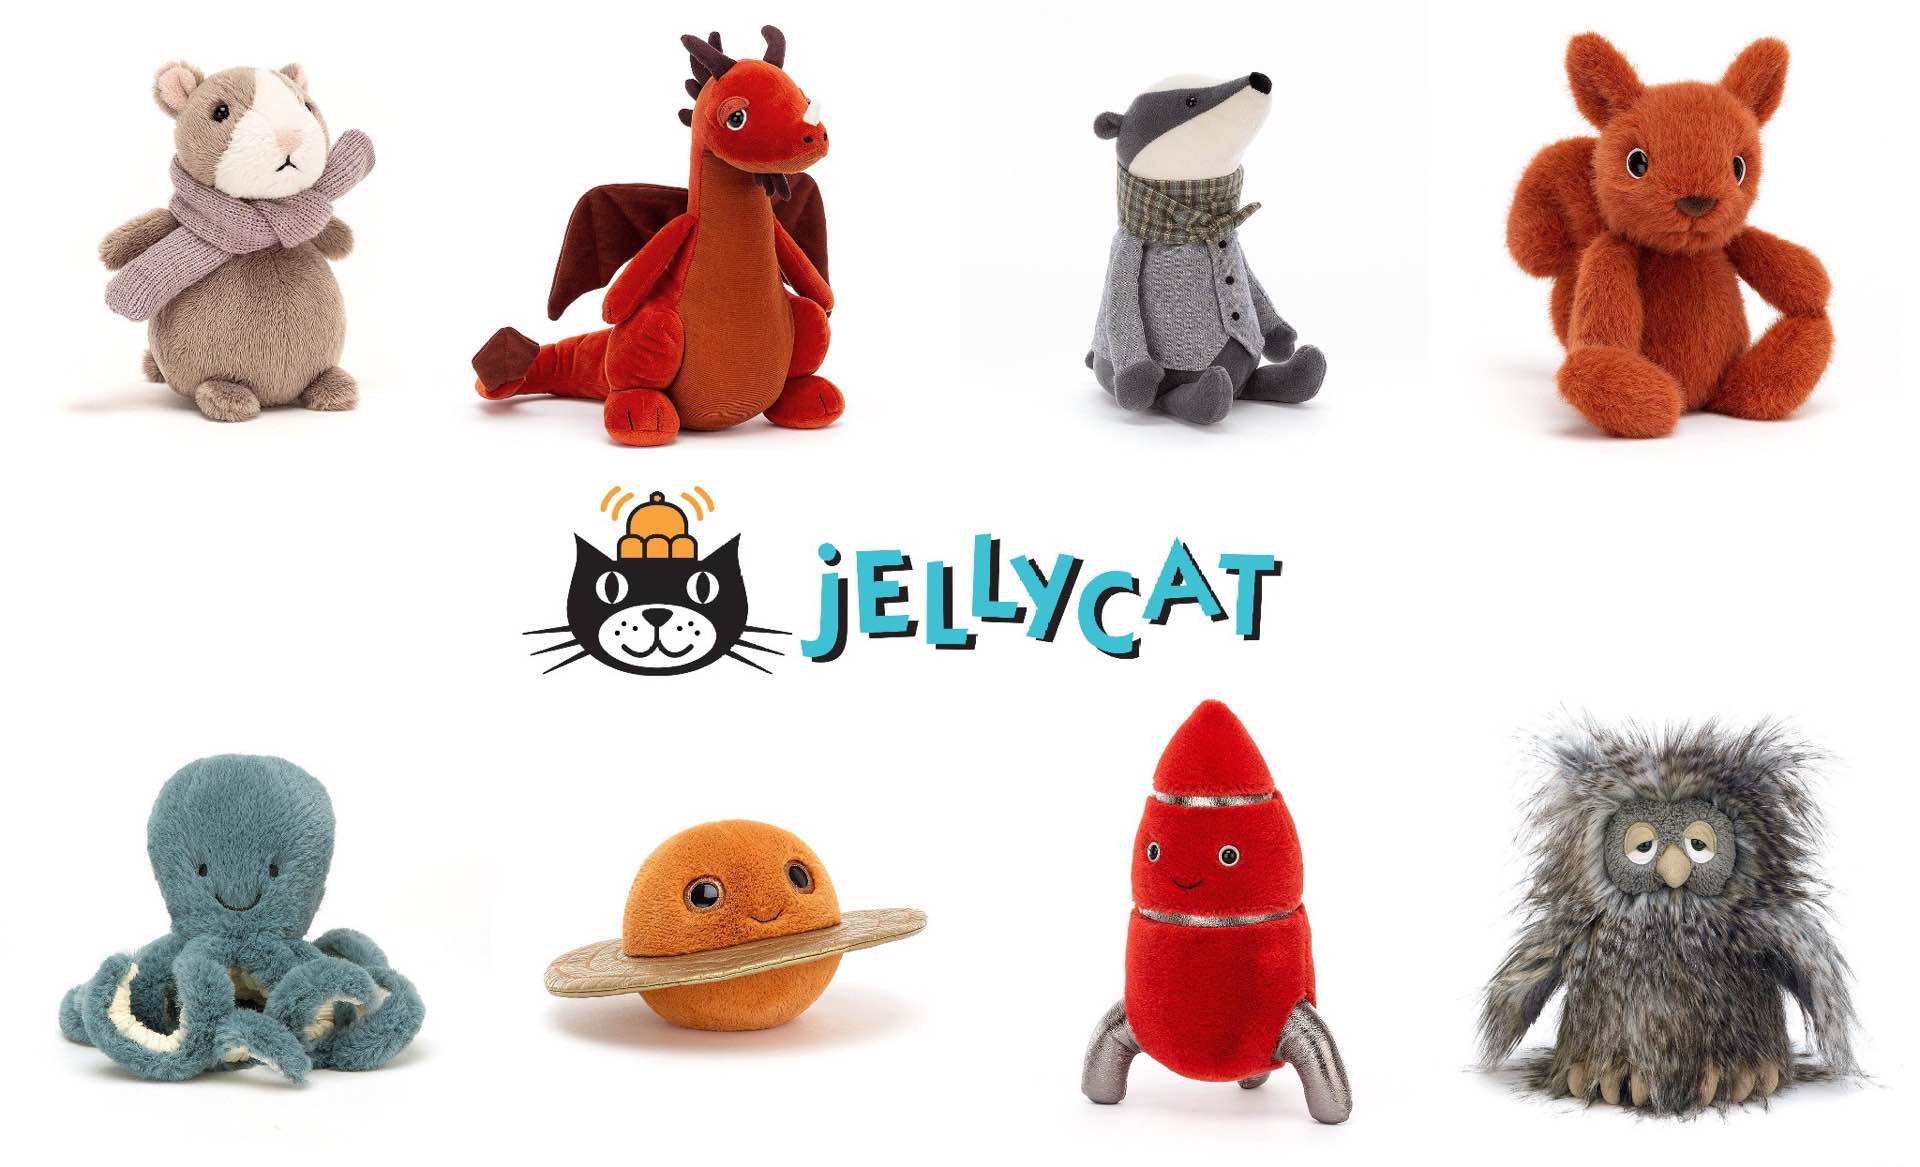 Jellycat stuffed animals. (prices vary, mostly in the $15–$35 range per plush)